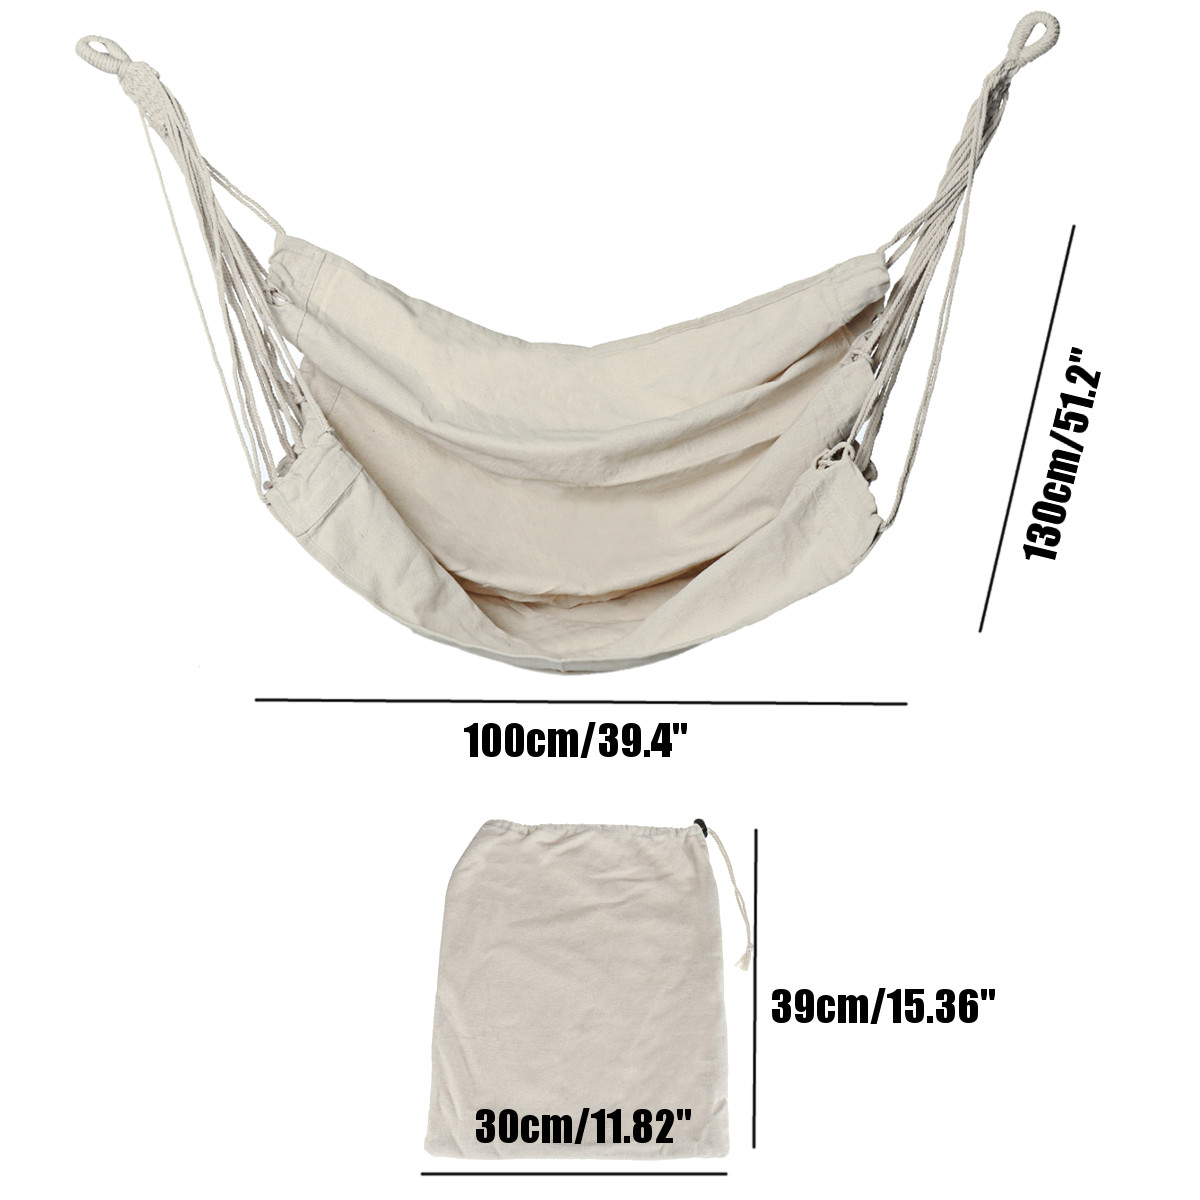 100x150cm-120kg-Max-Load-Fabric-Hammock-Chair-Hanging-Seat-Outdoor-Garden-Swing-Camping-Travel-1675577-2